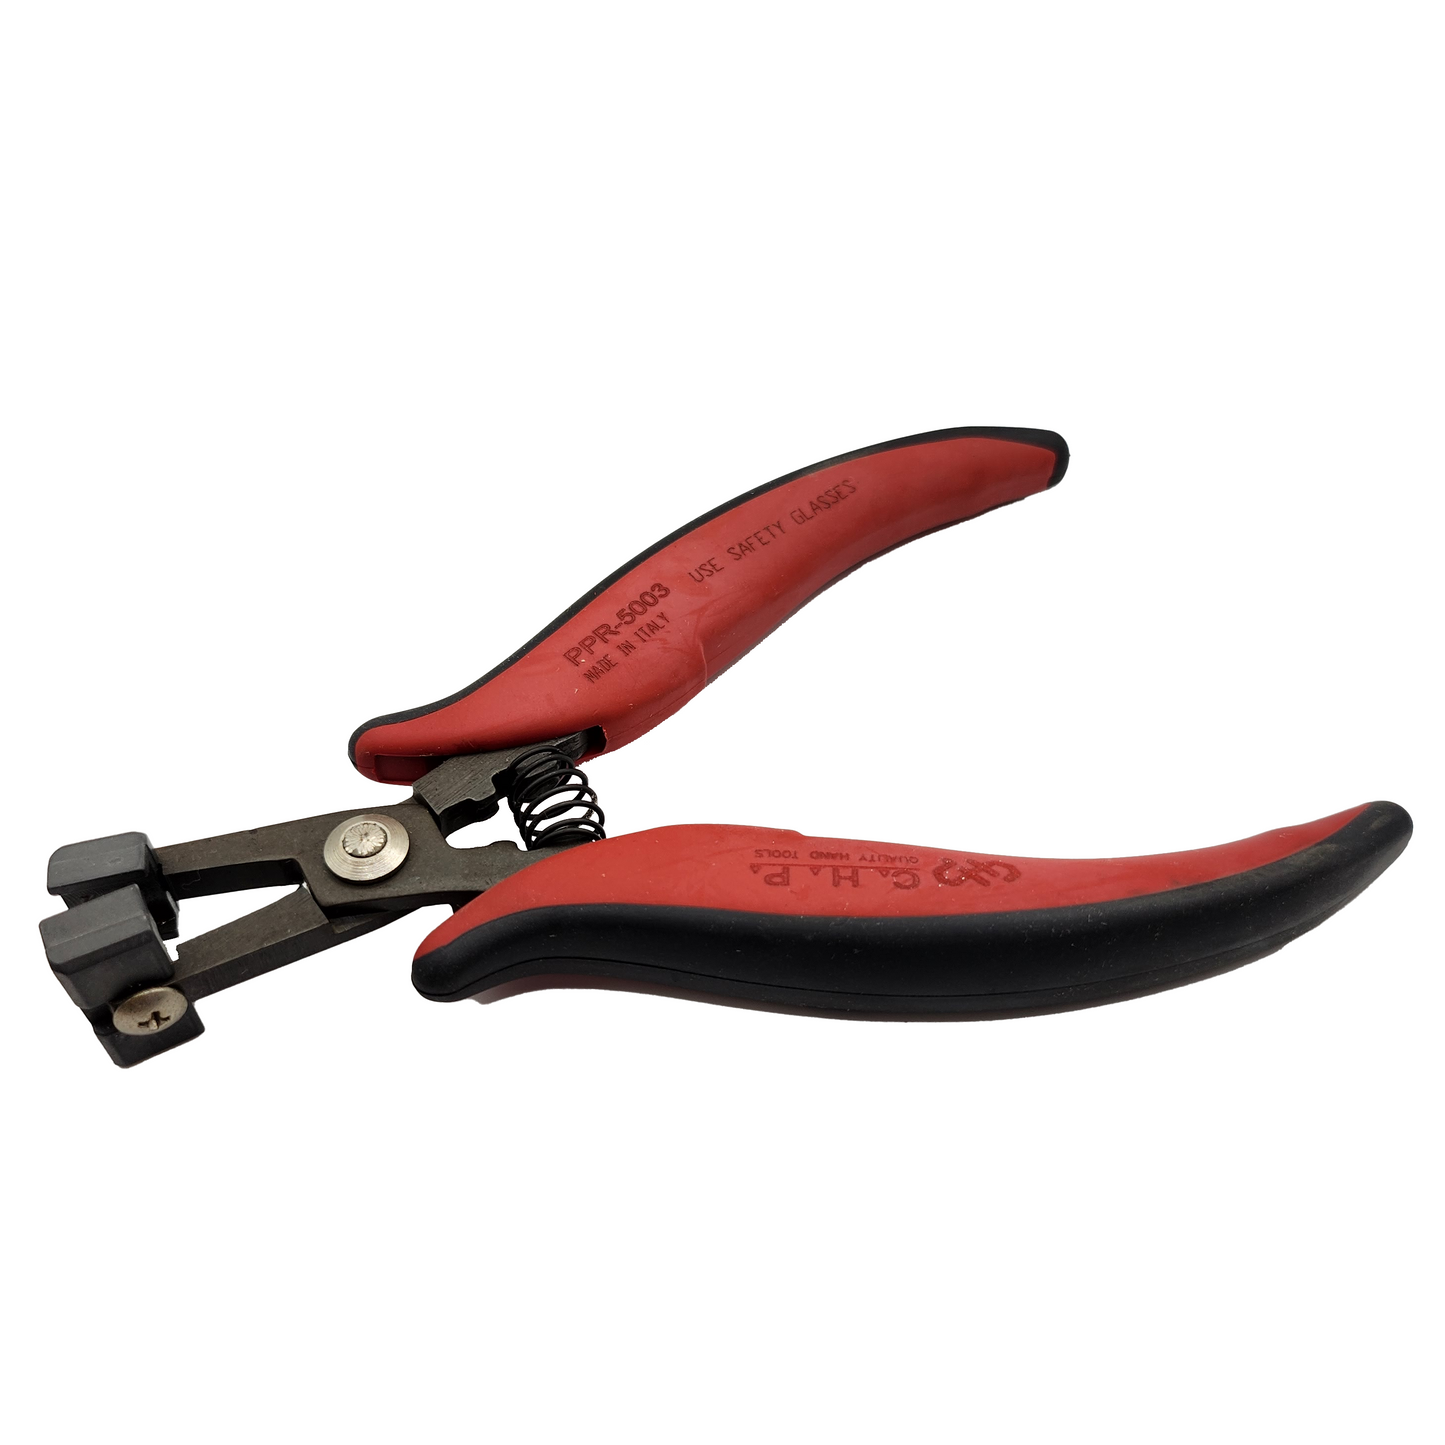 CHP_ CHP PPR-5003 Lead Forming Tool_ Cutters, Pliers, Multi-Tools_ Hakko Products